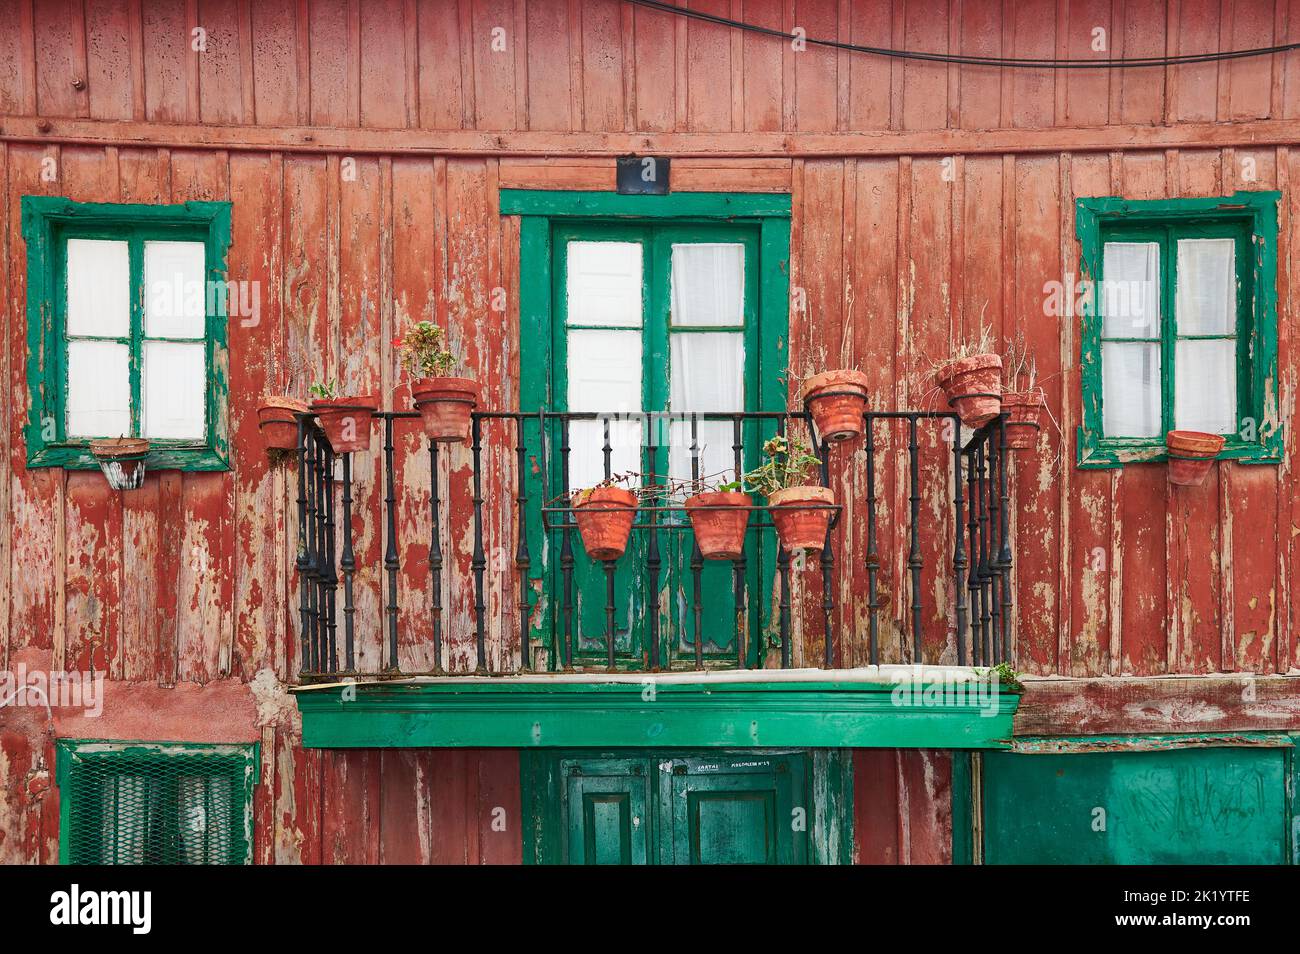 Detail of ancient wooden house in red and green colors Stock Photo